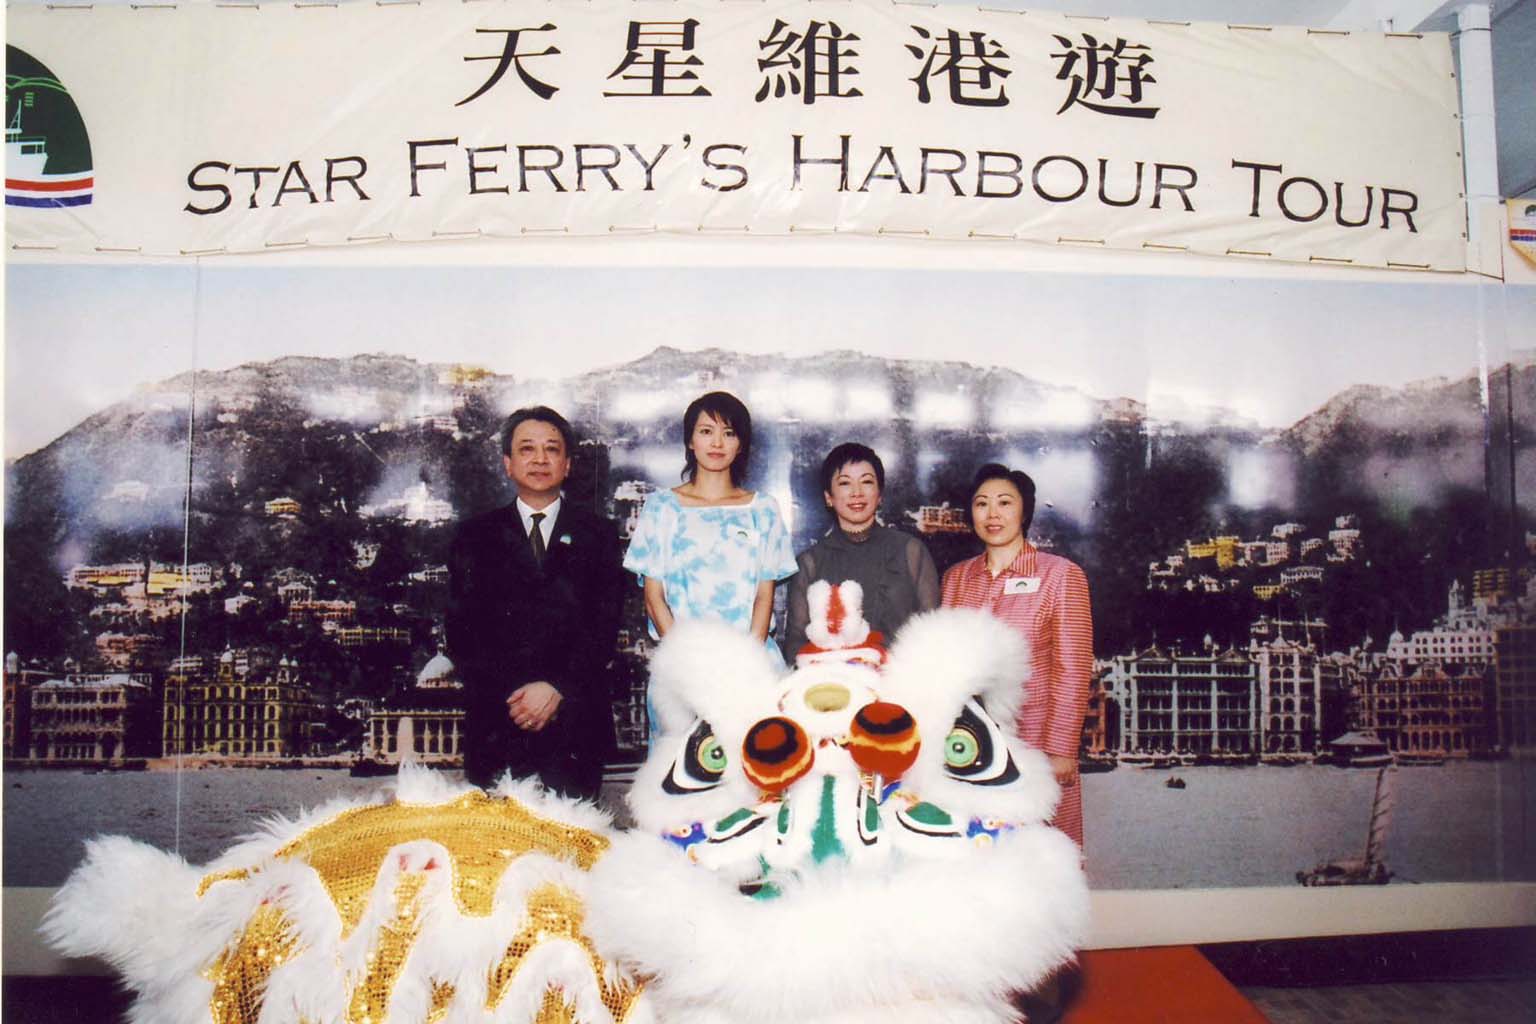 Ms. Eva Cheng JP (Commissioner for Tourism), Mrs. Selina Chow GBS JP (Chairman of the Hong Kong Tourism Board) and Ms. Gigi Leung (Hong Kong artist) officiated the launching ceremony of Star Ferry’s Harbour Tour in July 2003